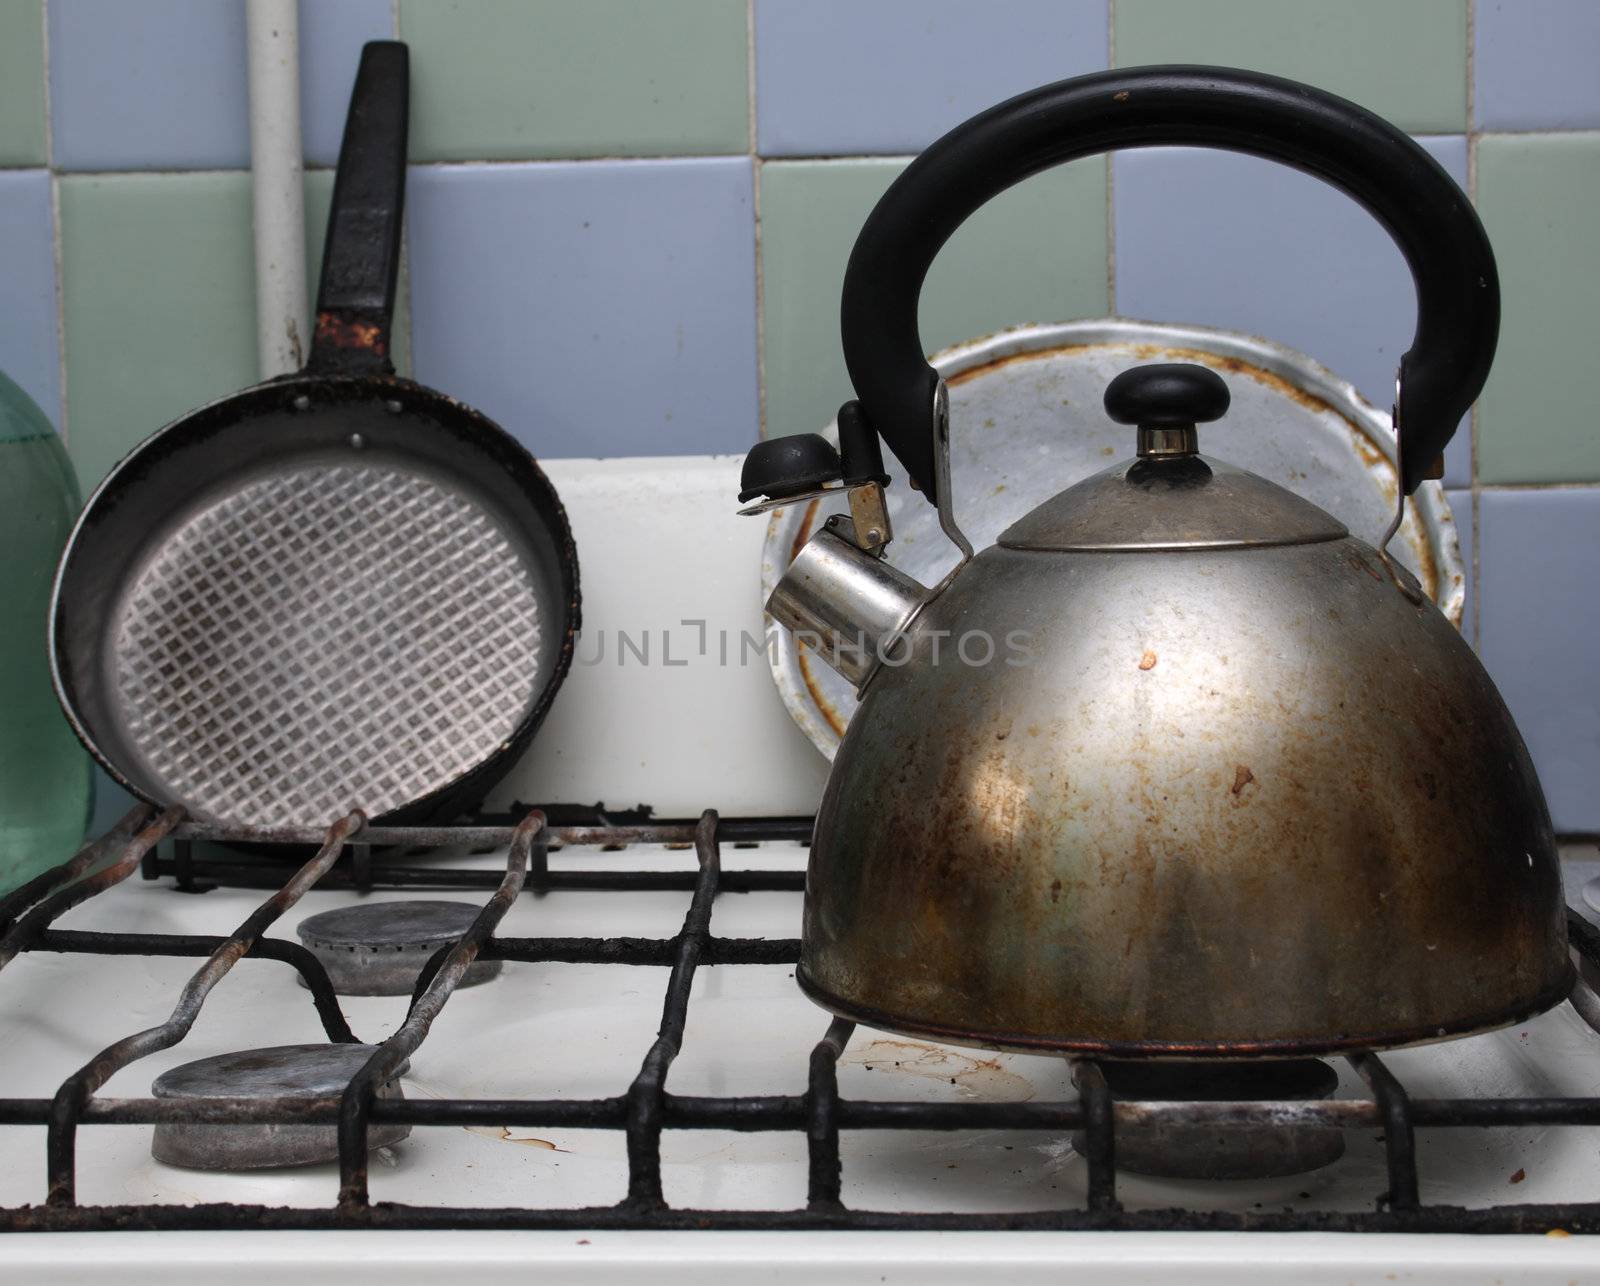 Gas stove with kettle on it by Gdolgikh